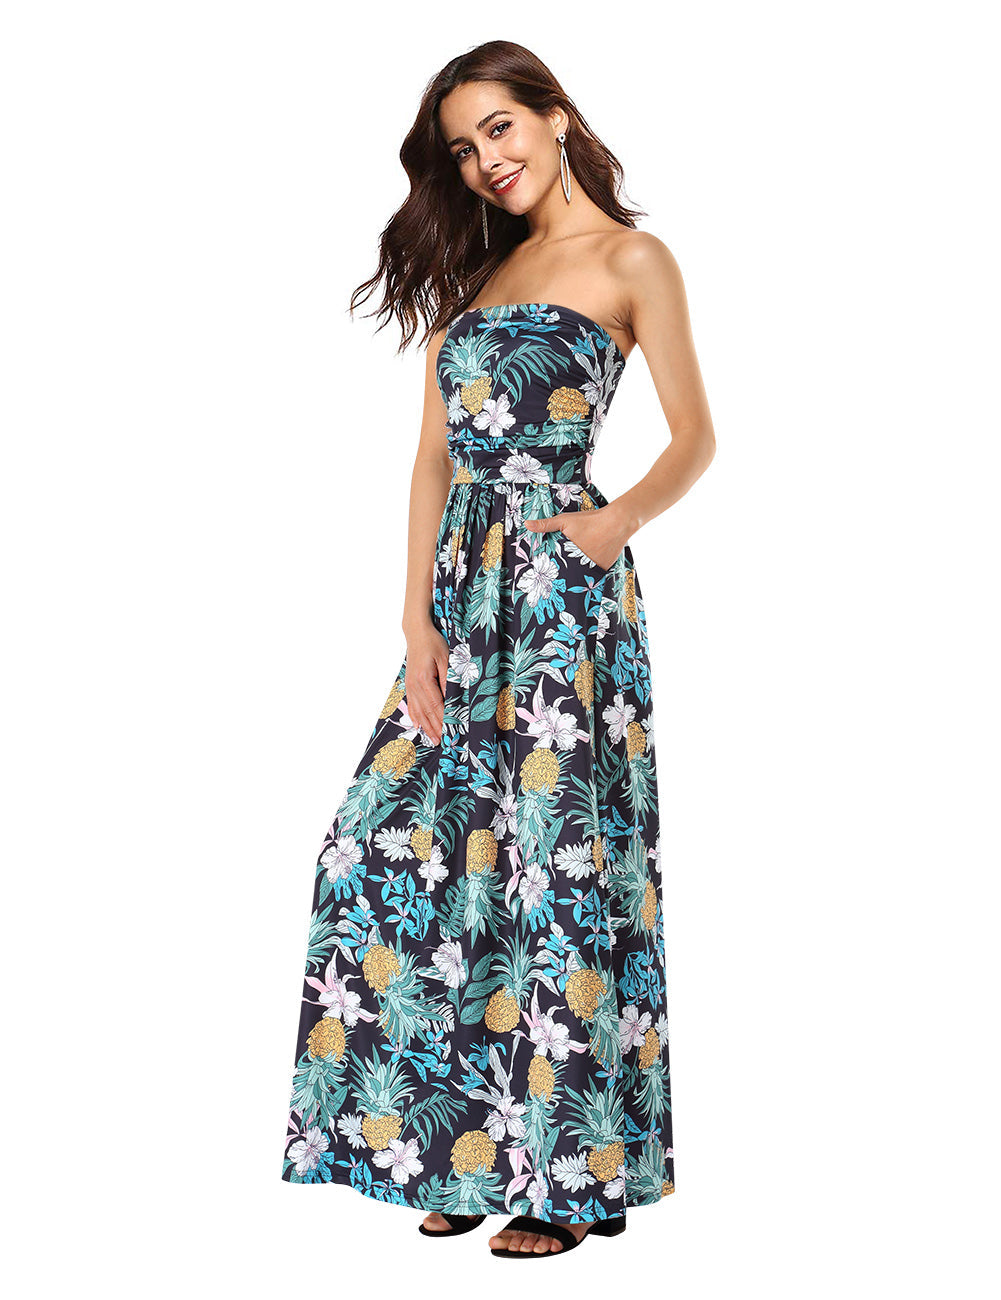 YESFASHION Women's Strapless Graceful Floral Party Maxi Long Dress Canna Black